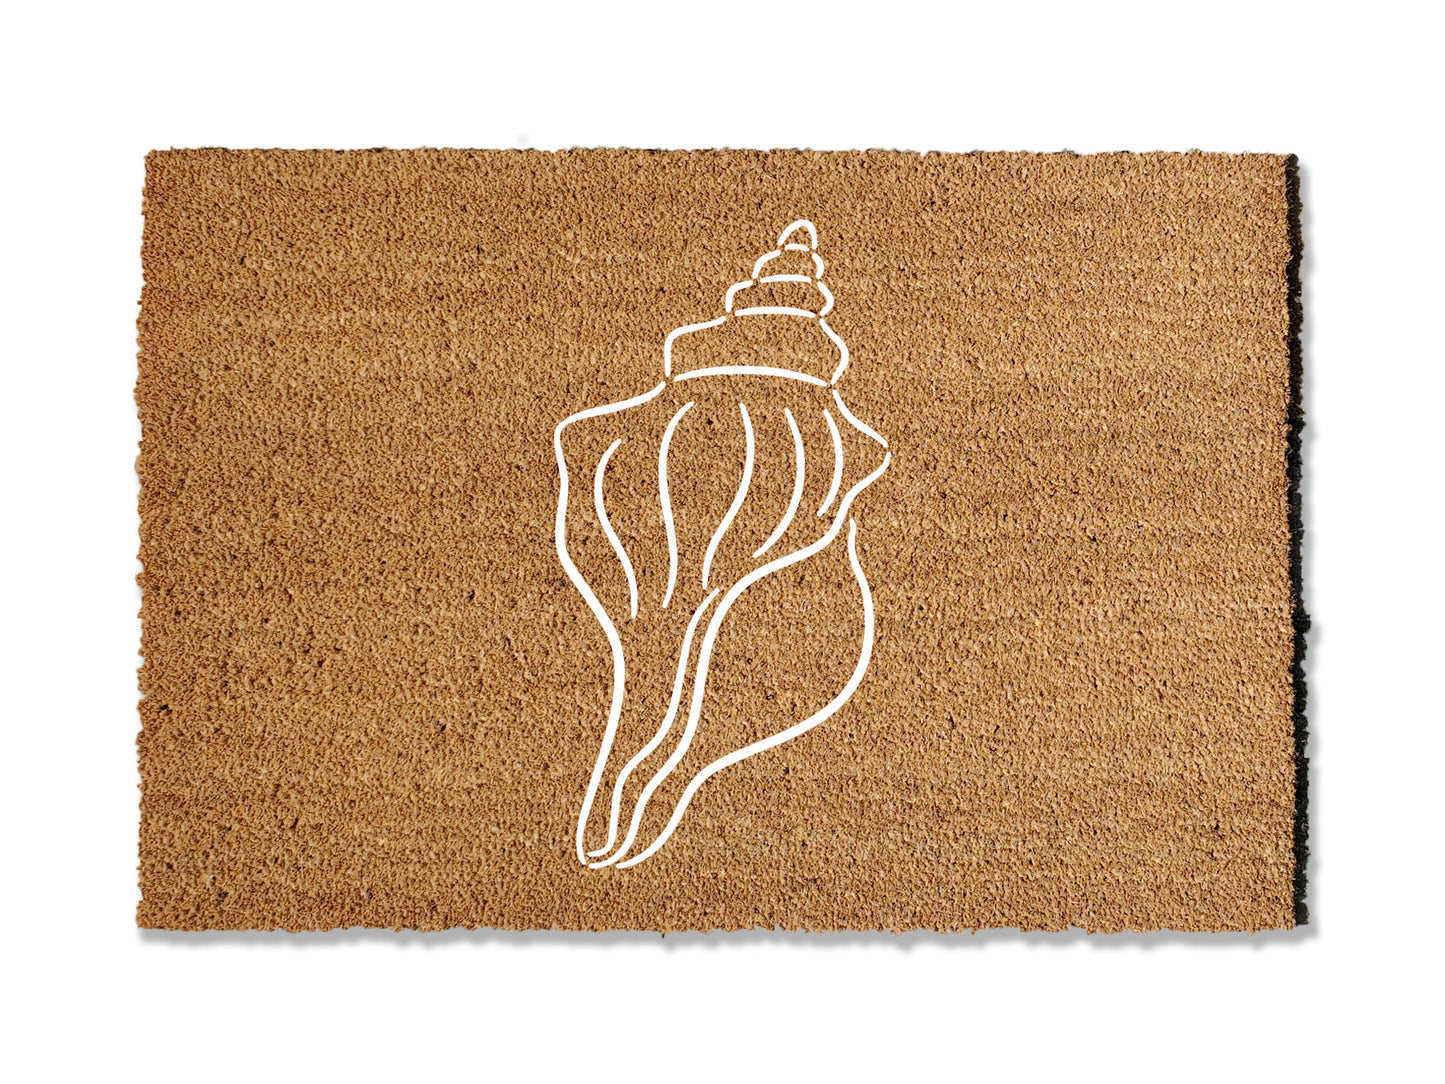 Transform your entryway with our versatile coir welcome doormat adorned with a beautiful Conch Shell design. Available in multiple sizes, this coastal-inspired mat is a perfect addition to your beach house, bringing a touch of seaside charm that spruces up your home's entrance.